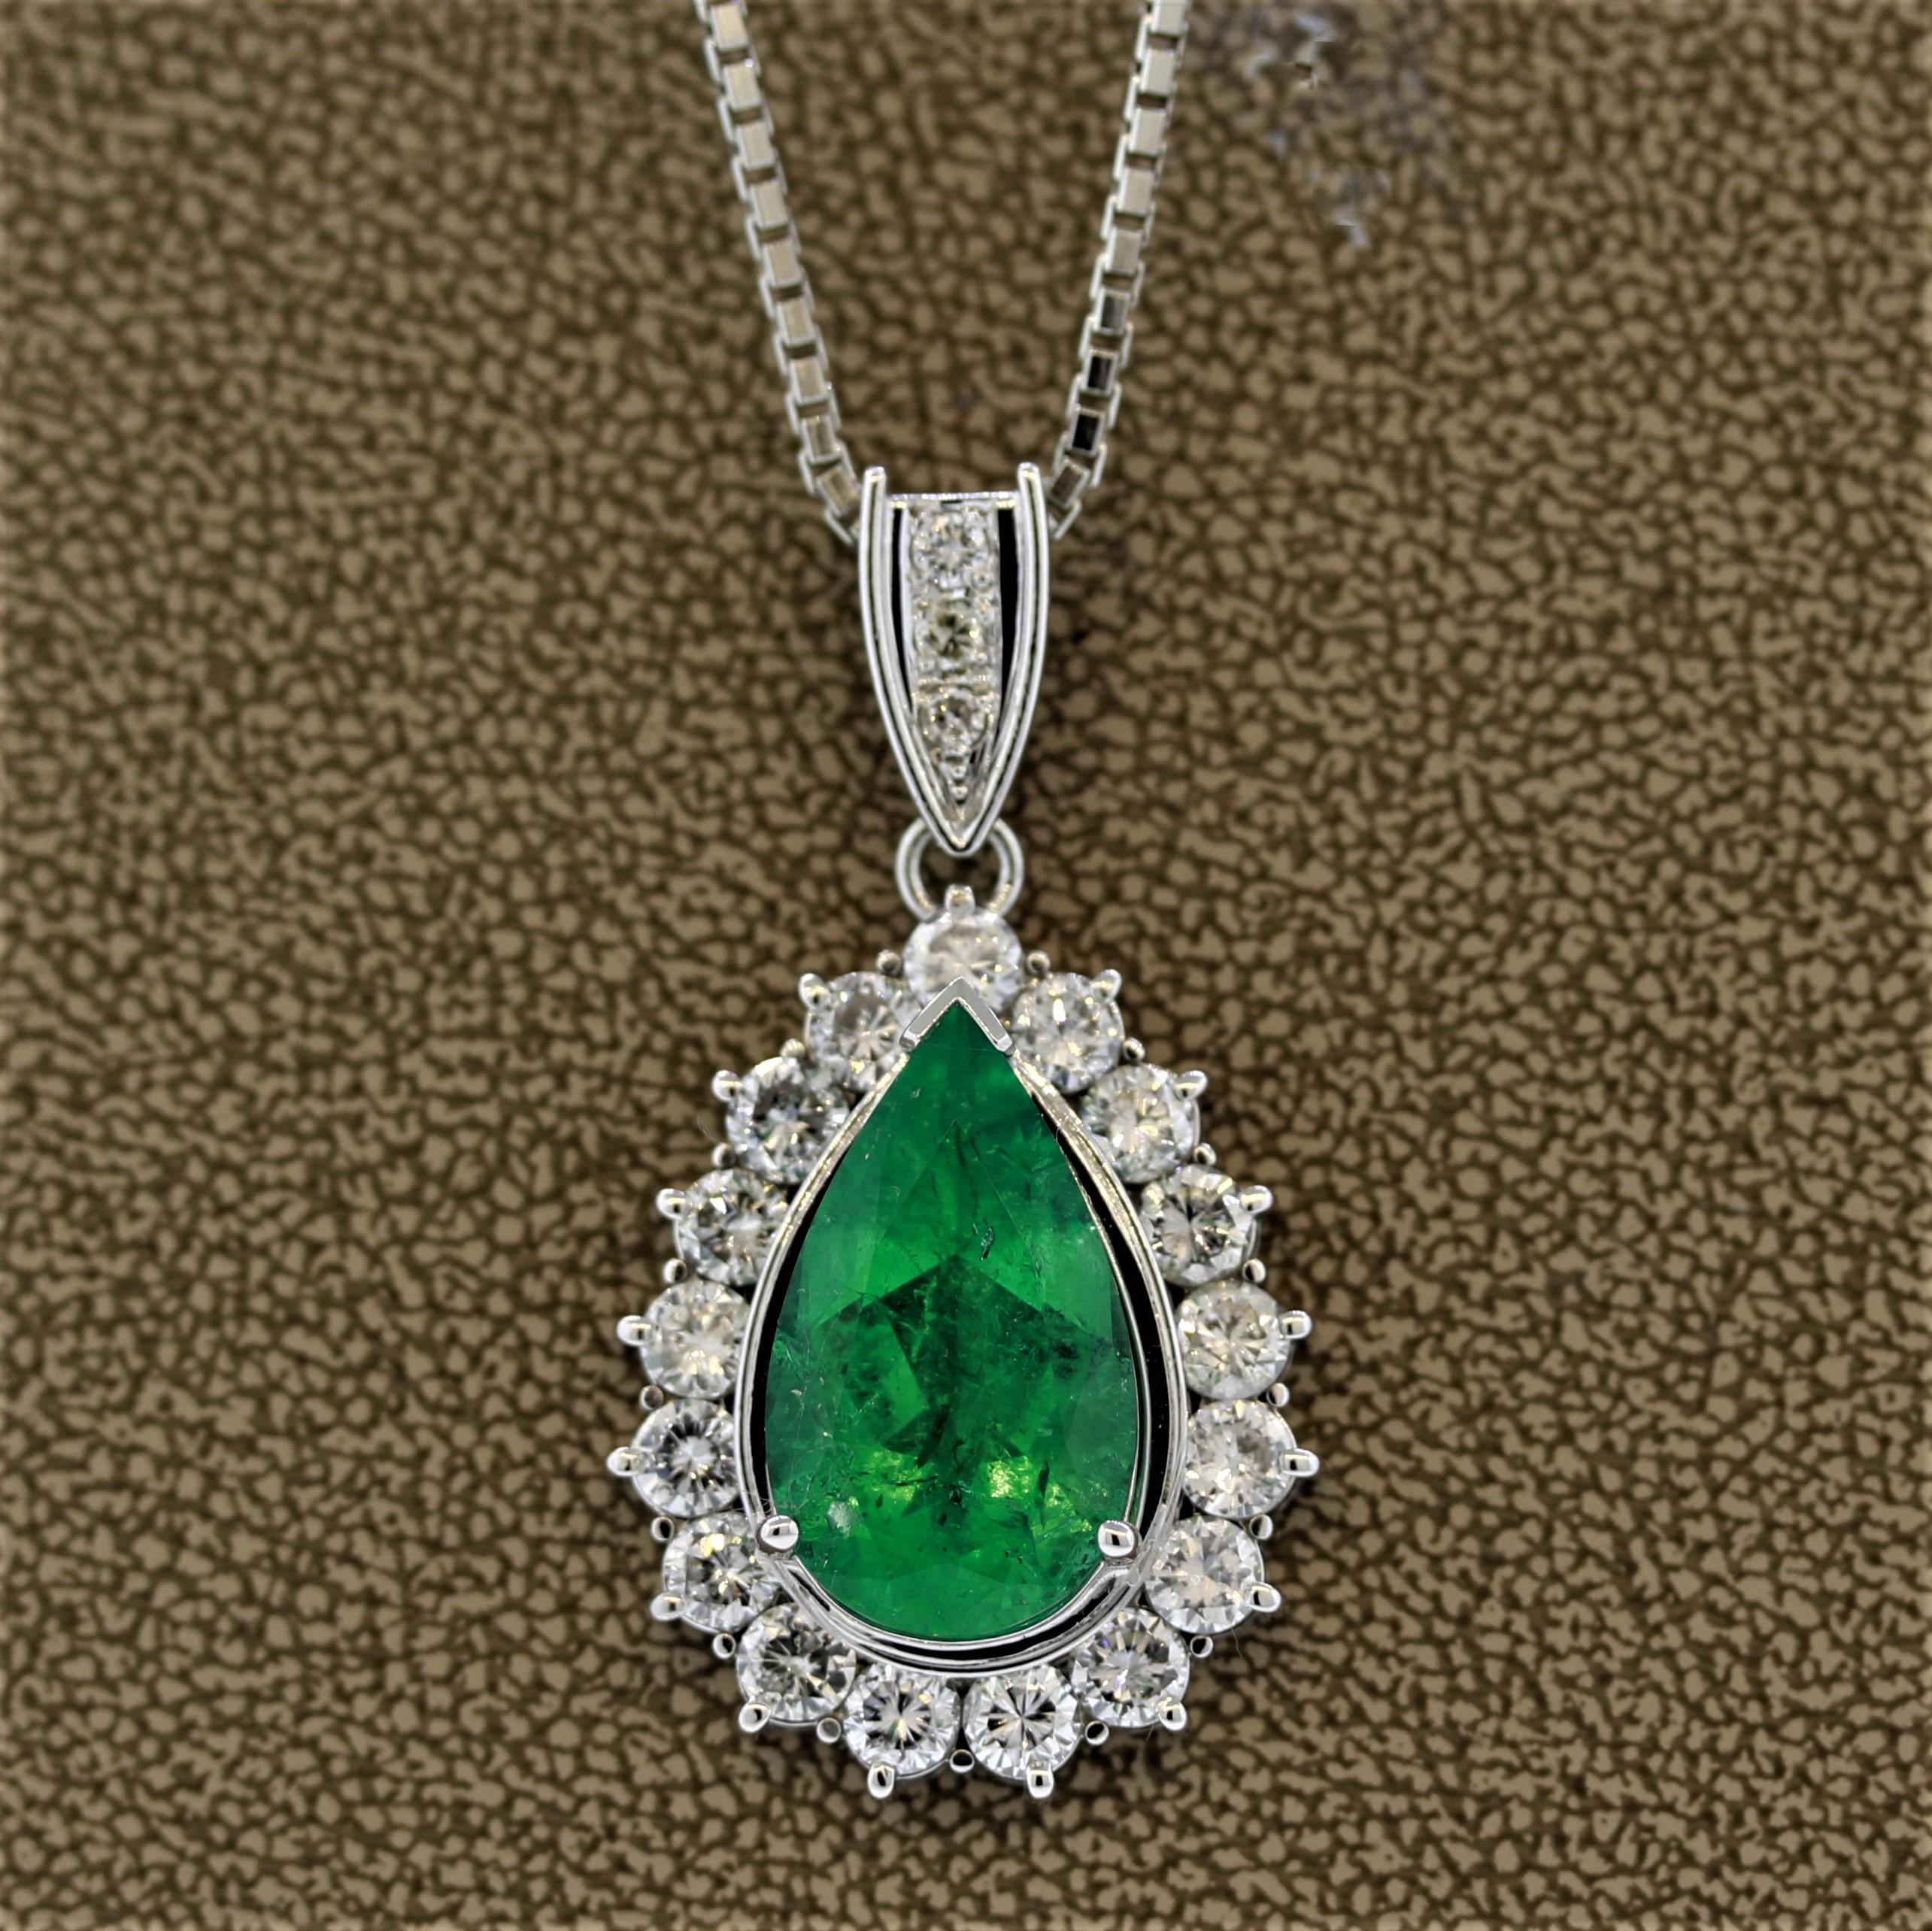 A large pear-shaped emerald takes center stage on this platinum pendant. The emerald weighs 8.30 carats and has a pleasant green color typical of Colombian emeralds. It is haloed by 3.12 carats of large round brilliant cut diamonds along with 3